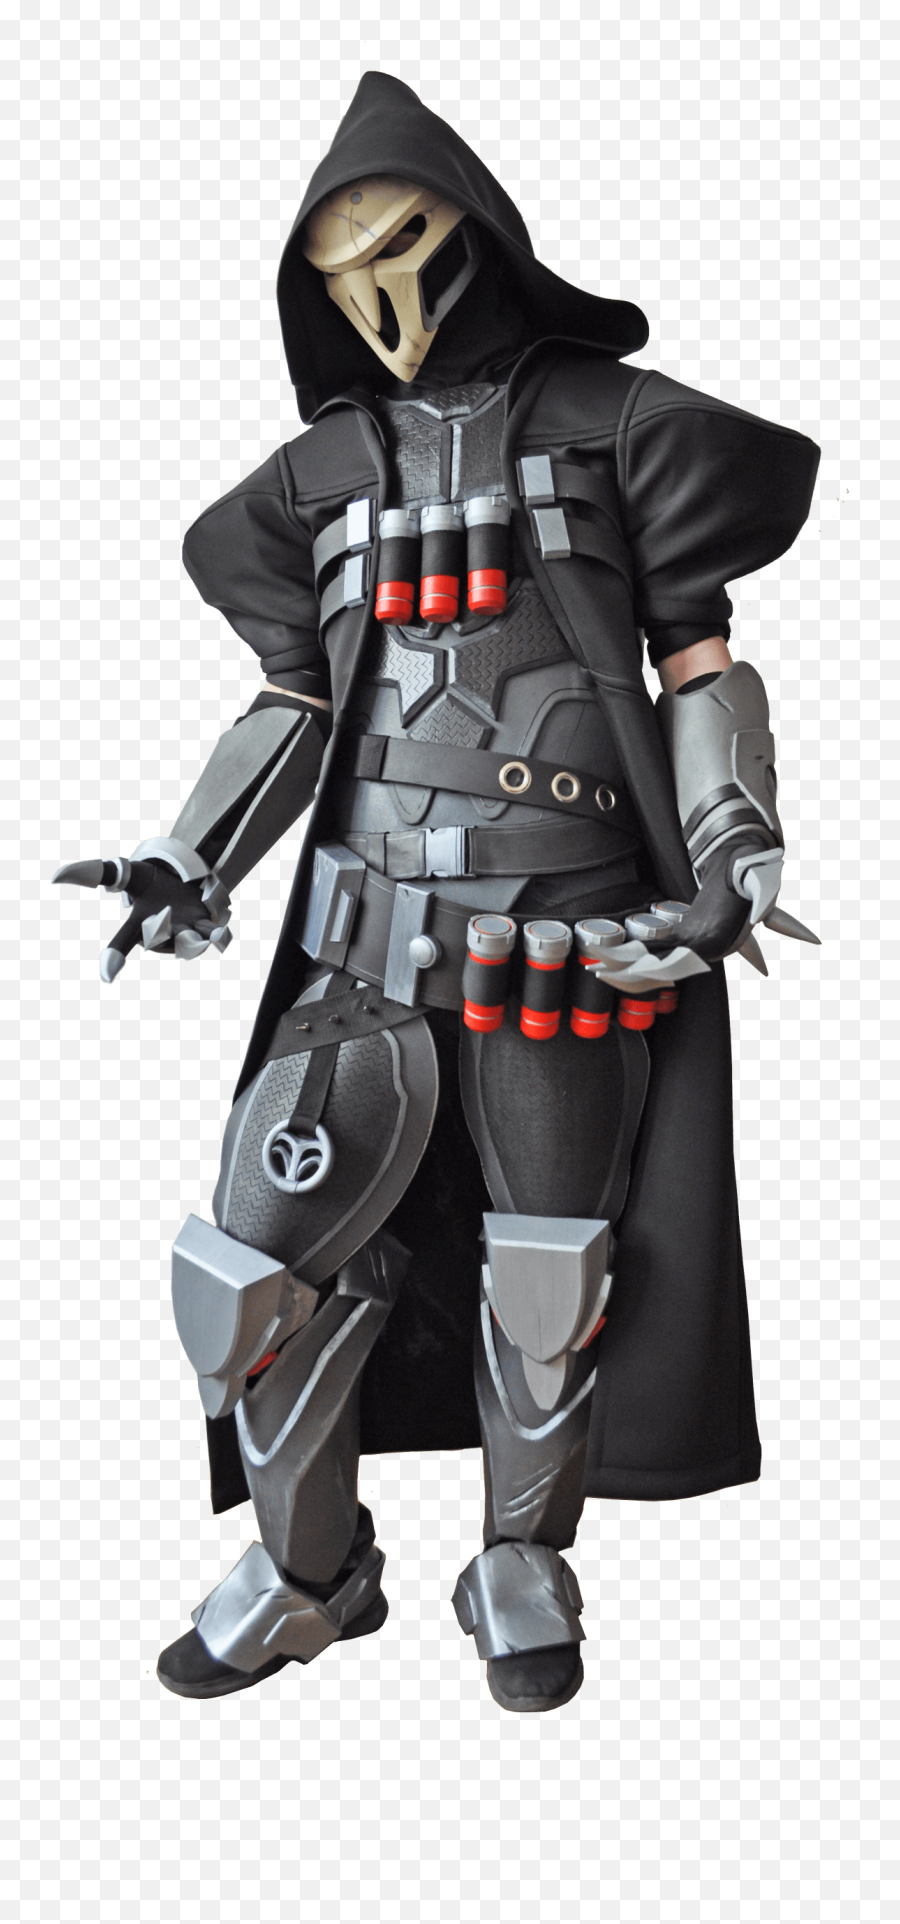 Overwatch Reaper Costume All Skins - Reaper From Overwatch Costume Png,Fortnite Reaper Png